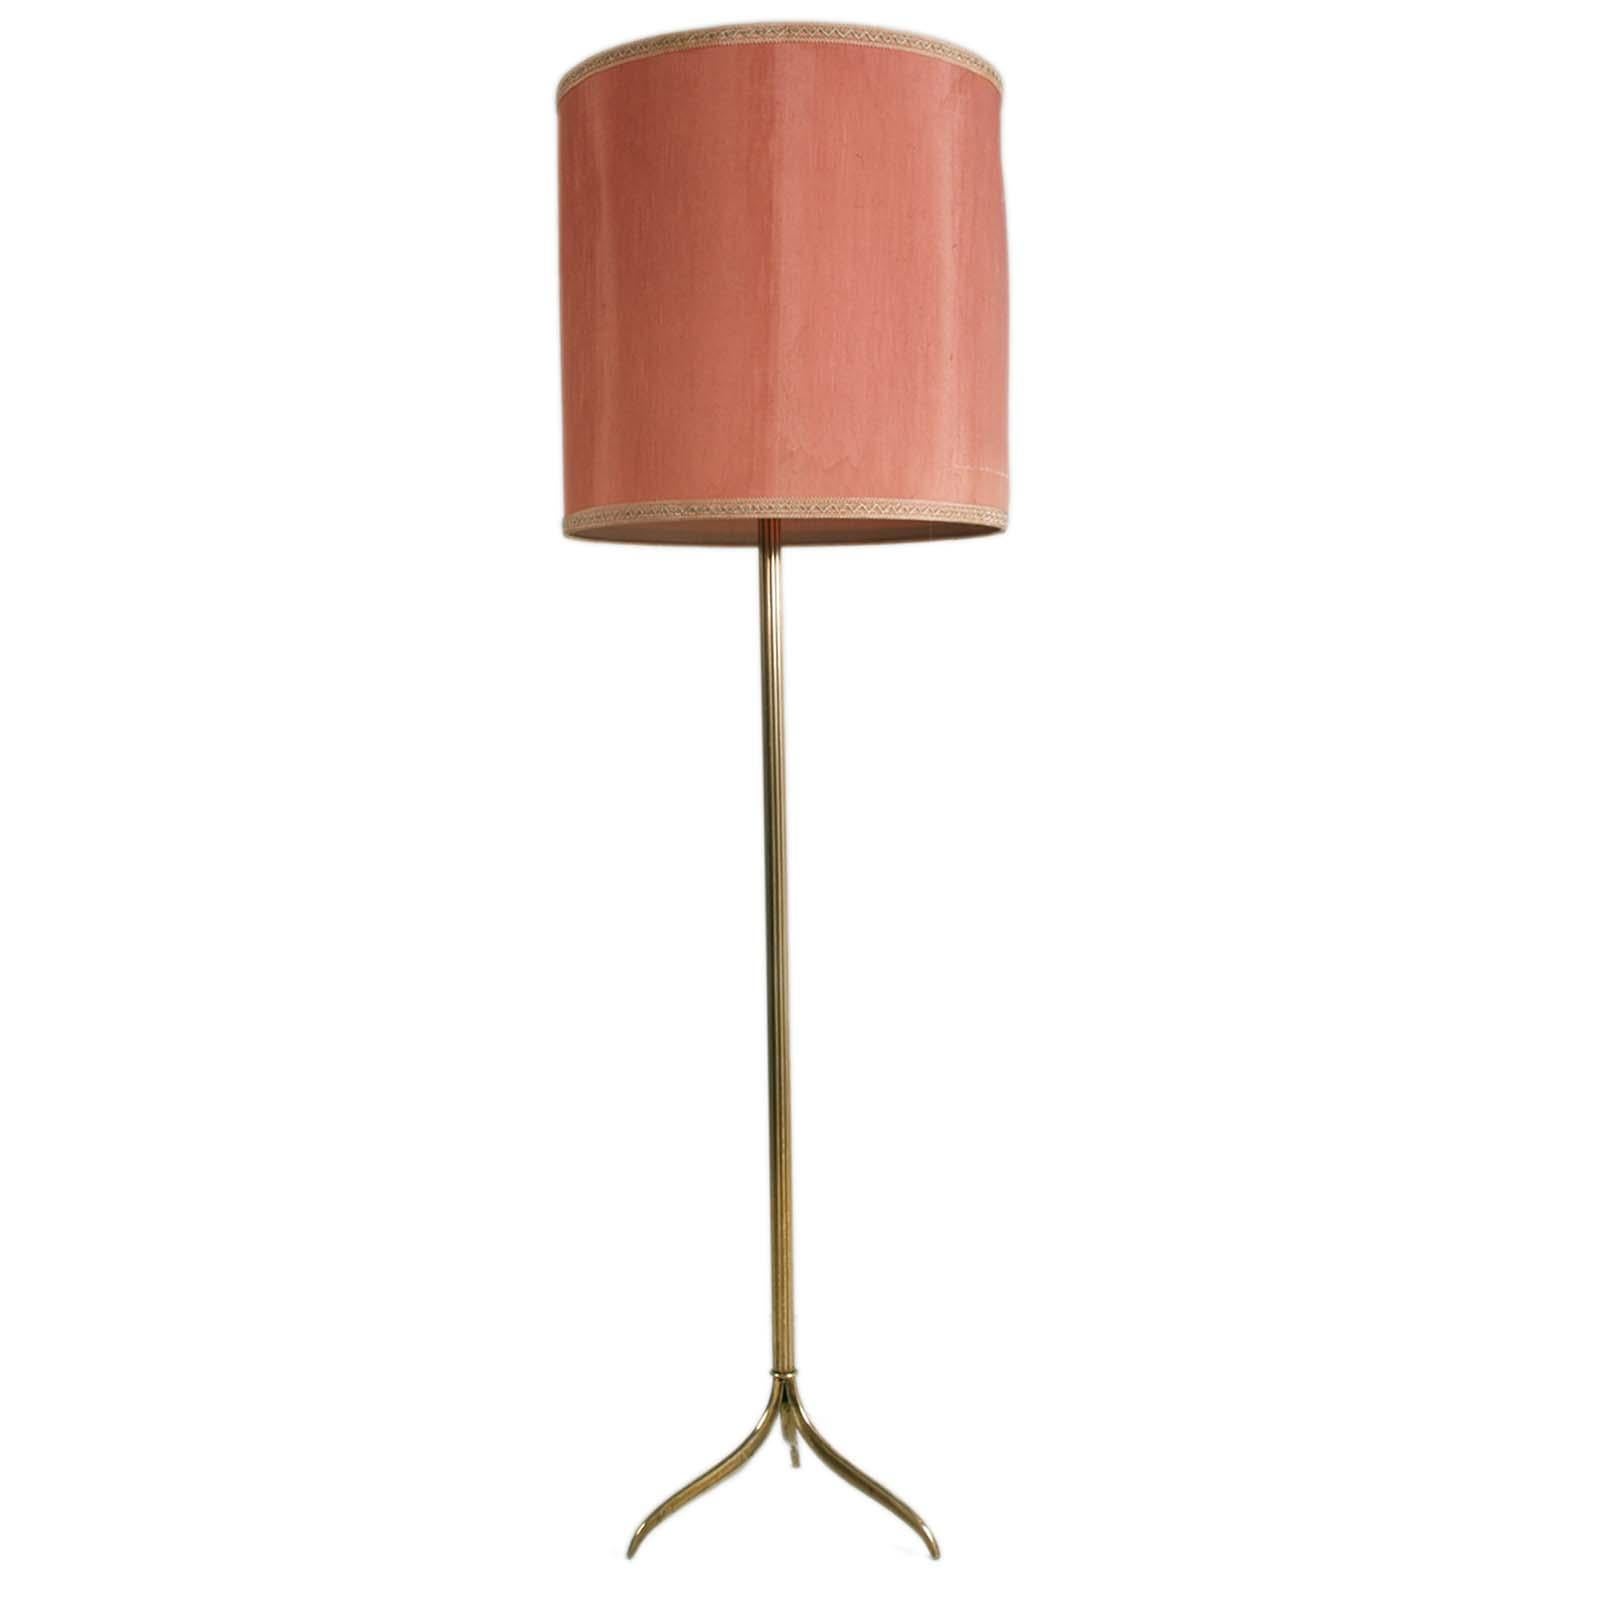 Precious and elegant art deco floor lamp model Florence 1920s in gilded brass by Ghidini1849